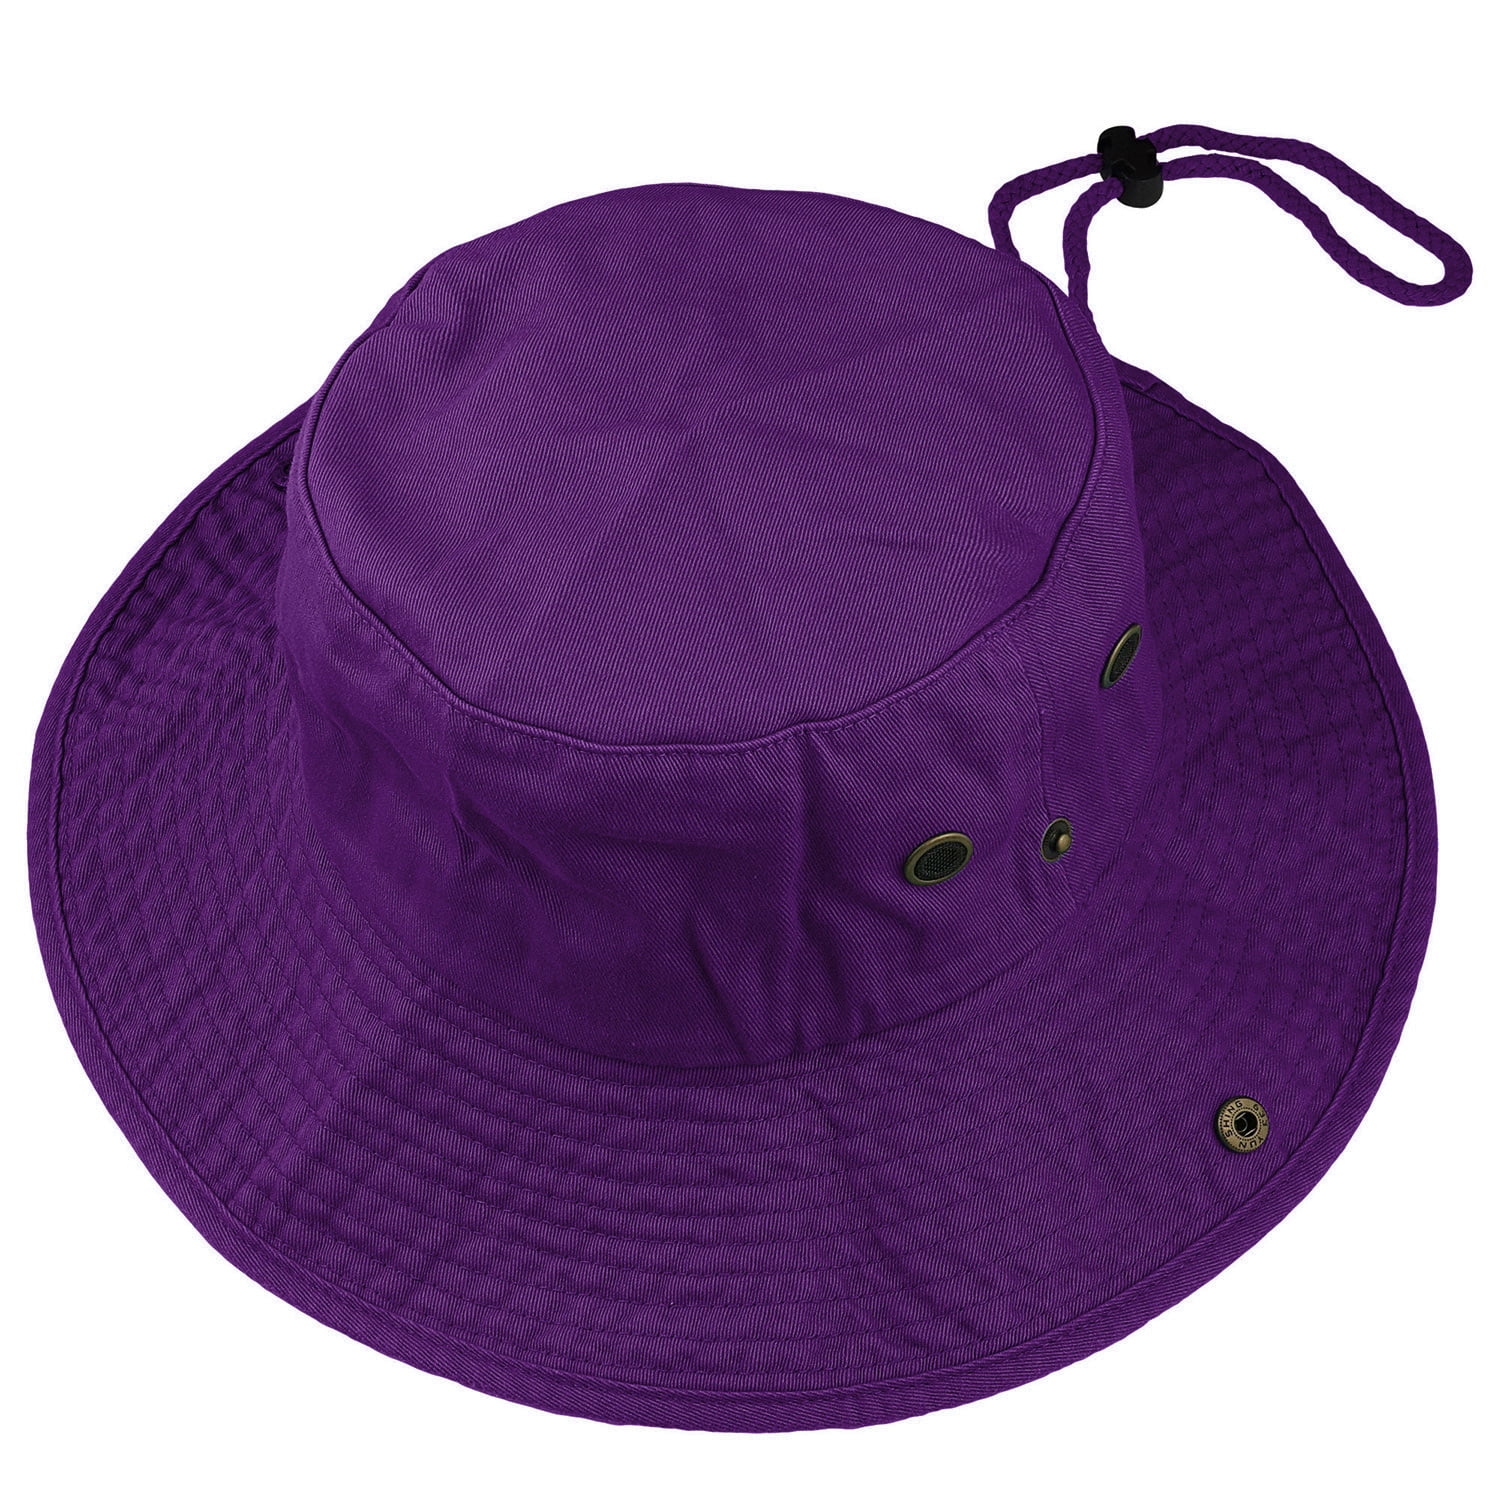 D-GROEE Bucket Hat Wide Brim UV Protection Sun Hat Boonie Hats Fishing  Hiking Safari Outdoor Hats for Men and Women